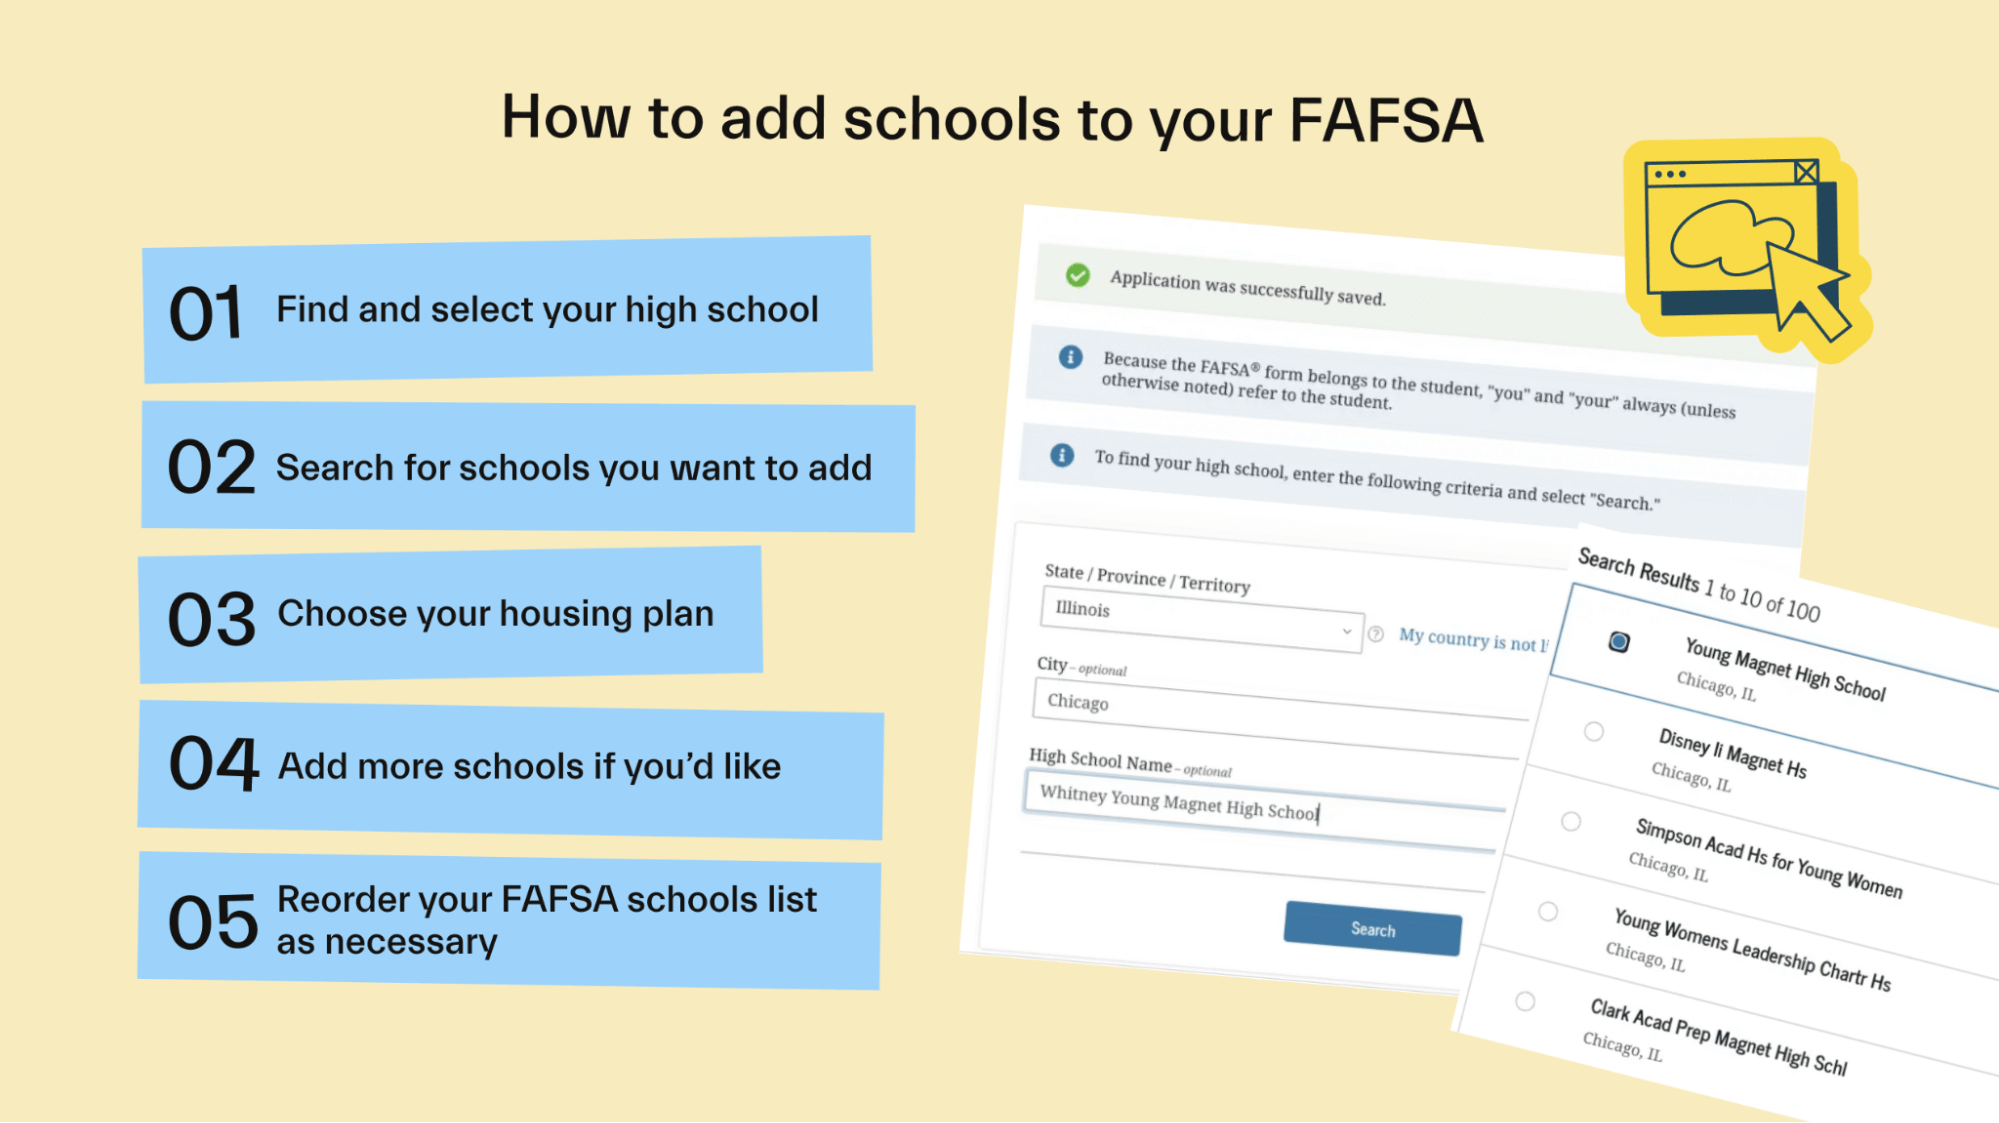 How to Add Schools to FAFSA